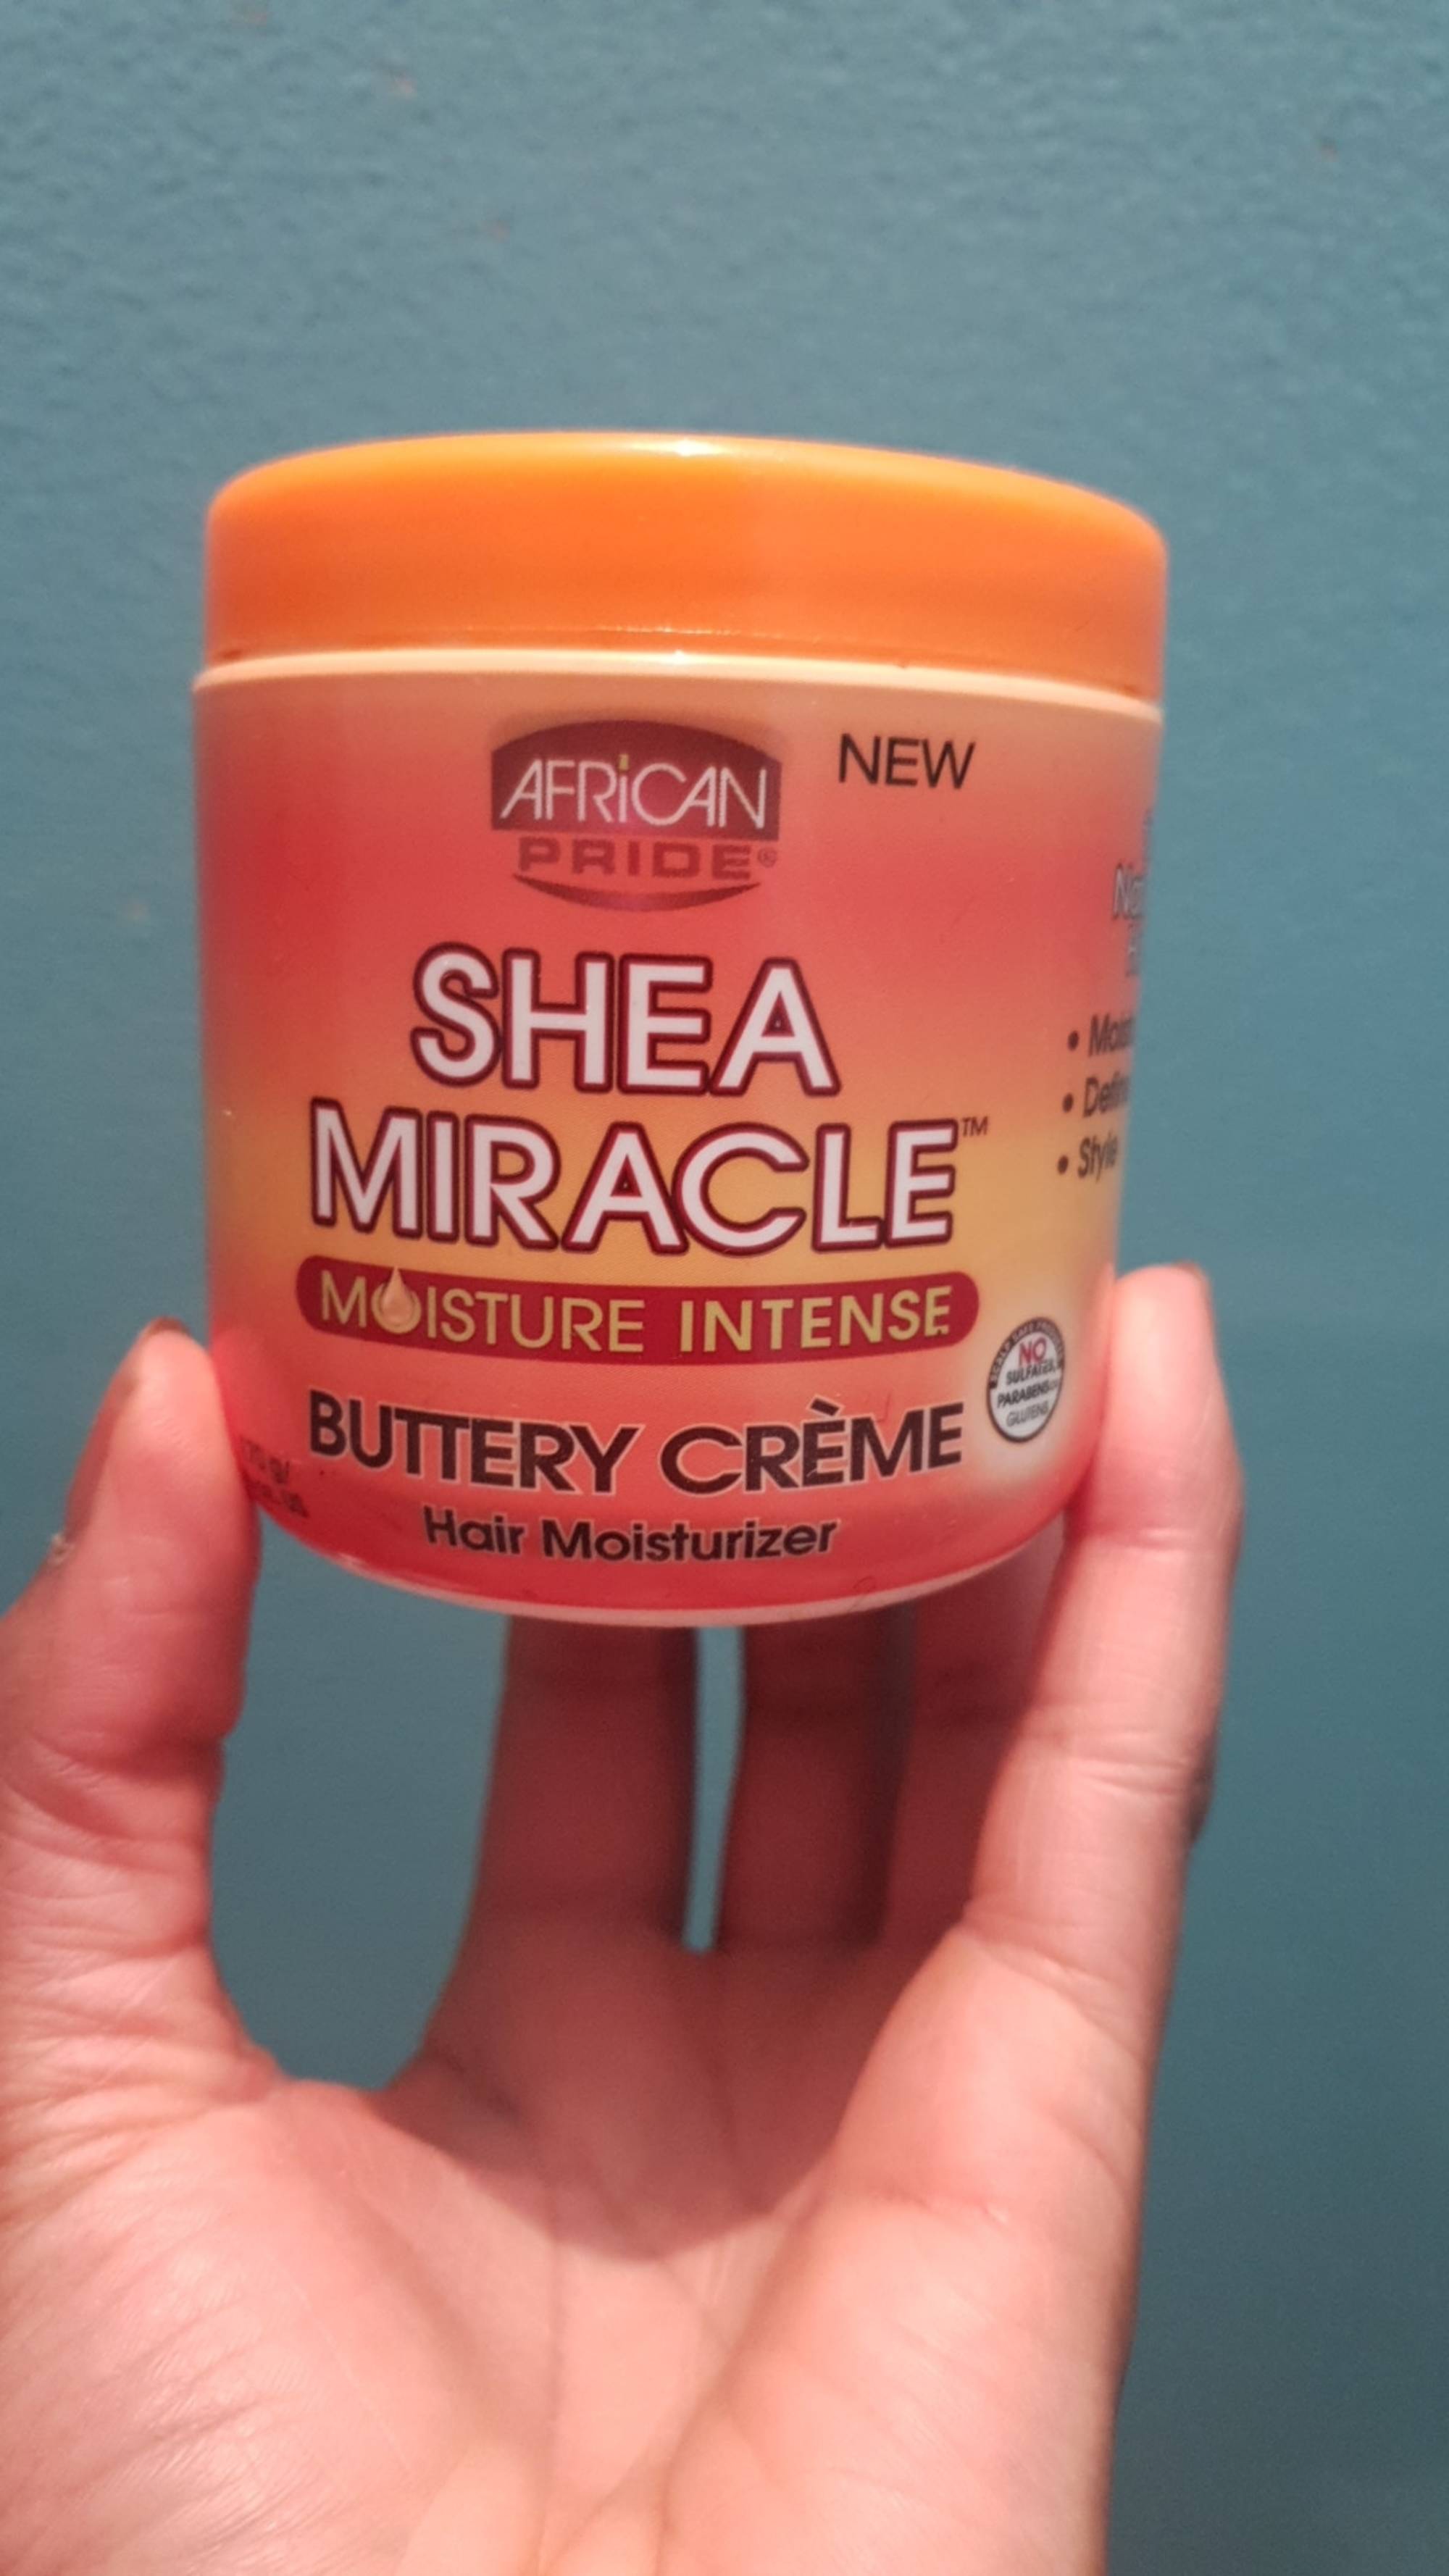 AFRICAN PRIDE - Shea miracle - Buttery crème